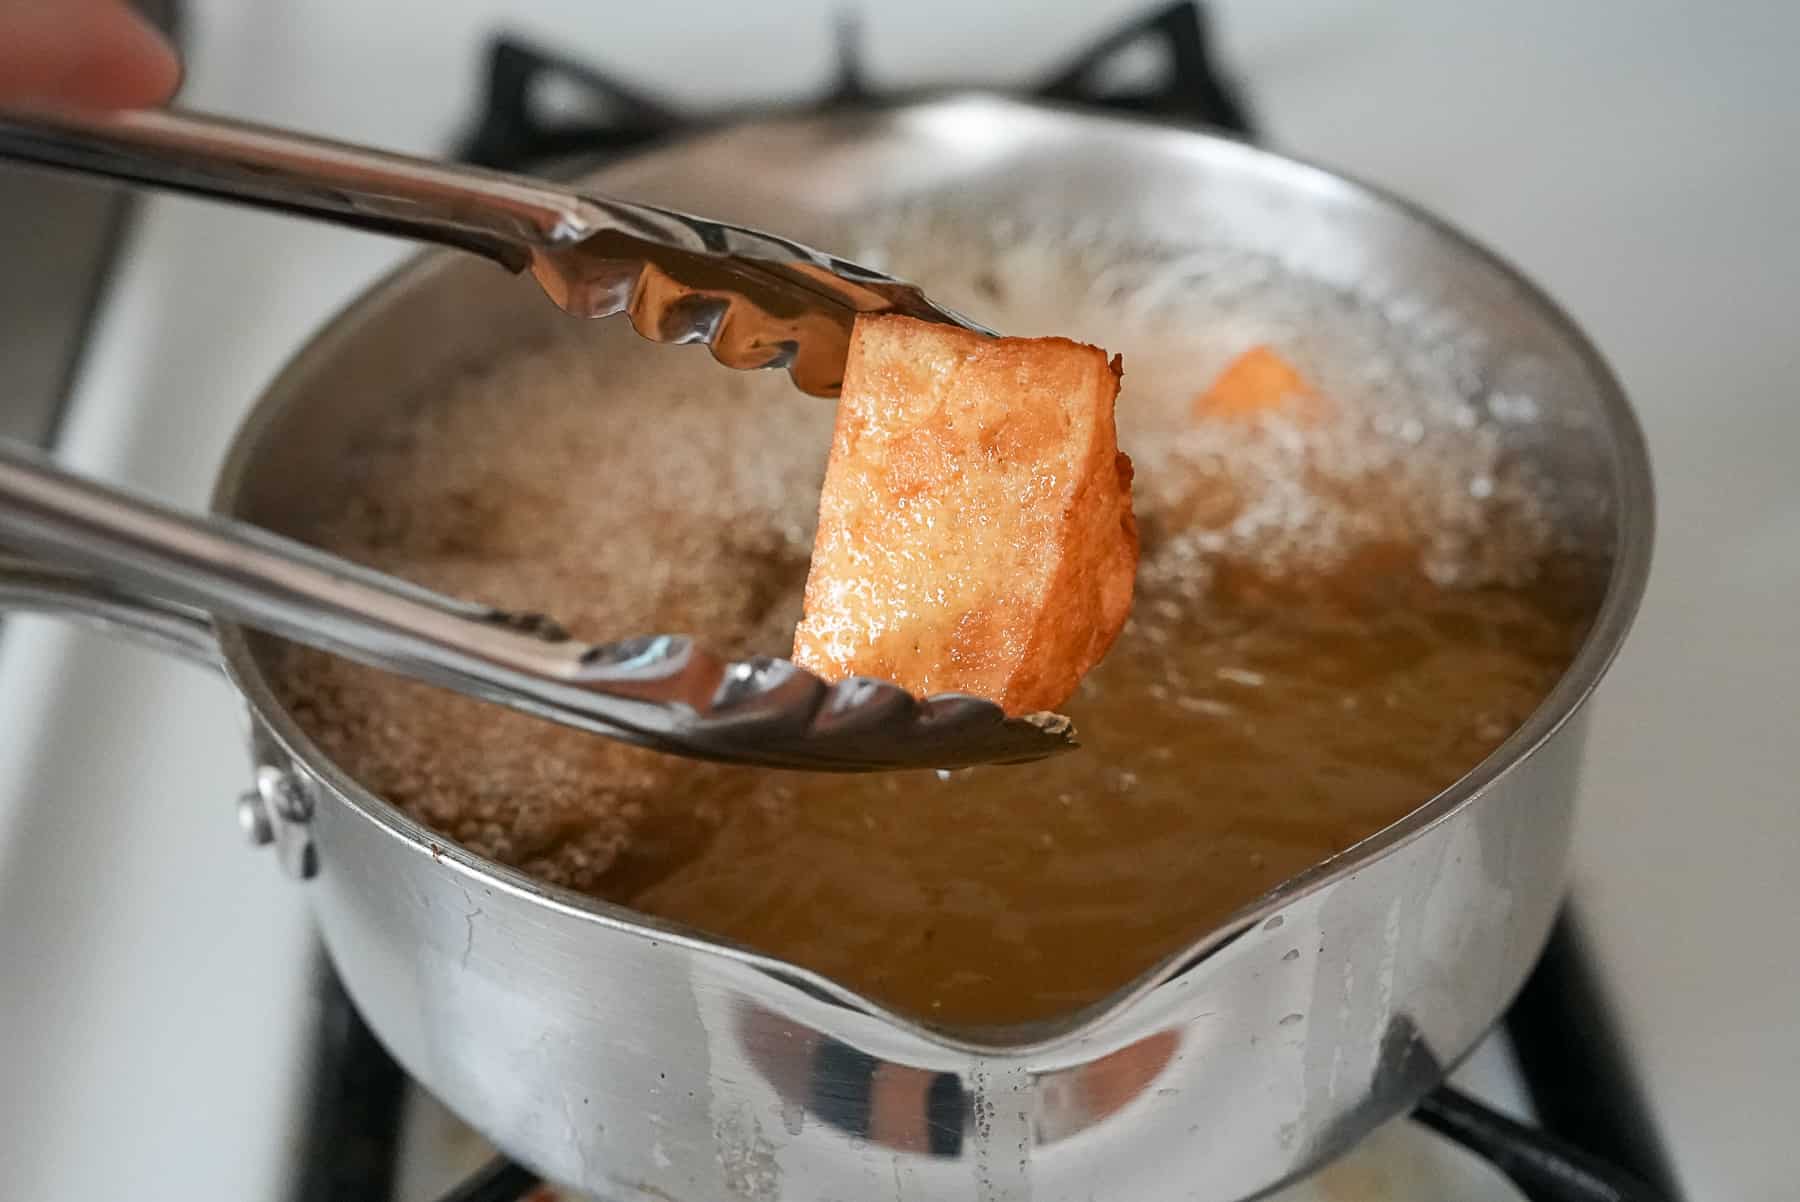 Tofu is ready when golden brown